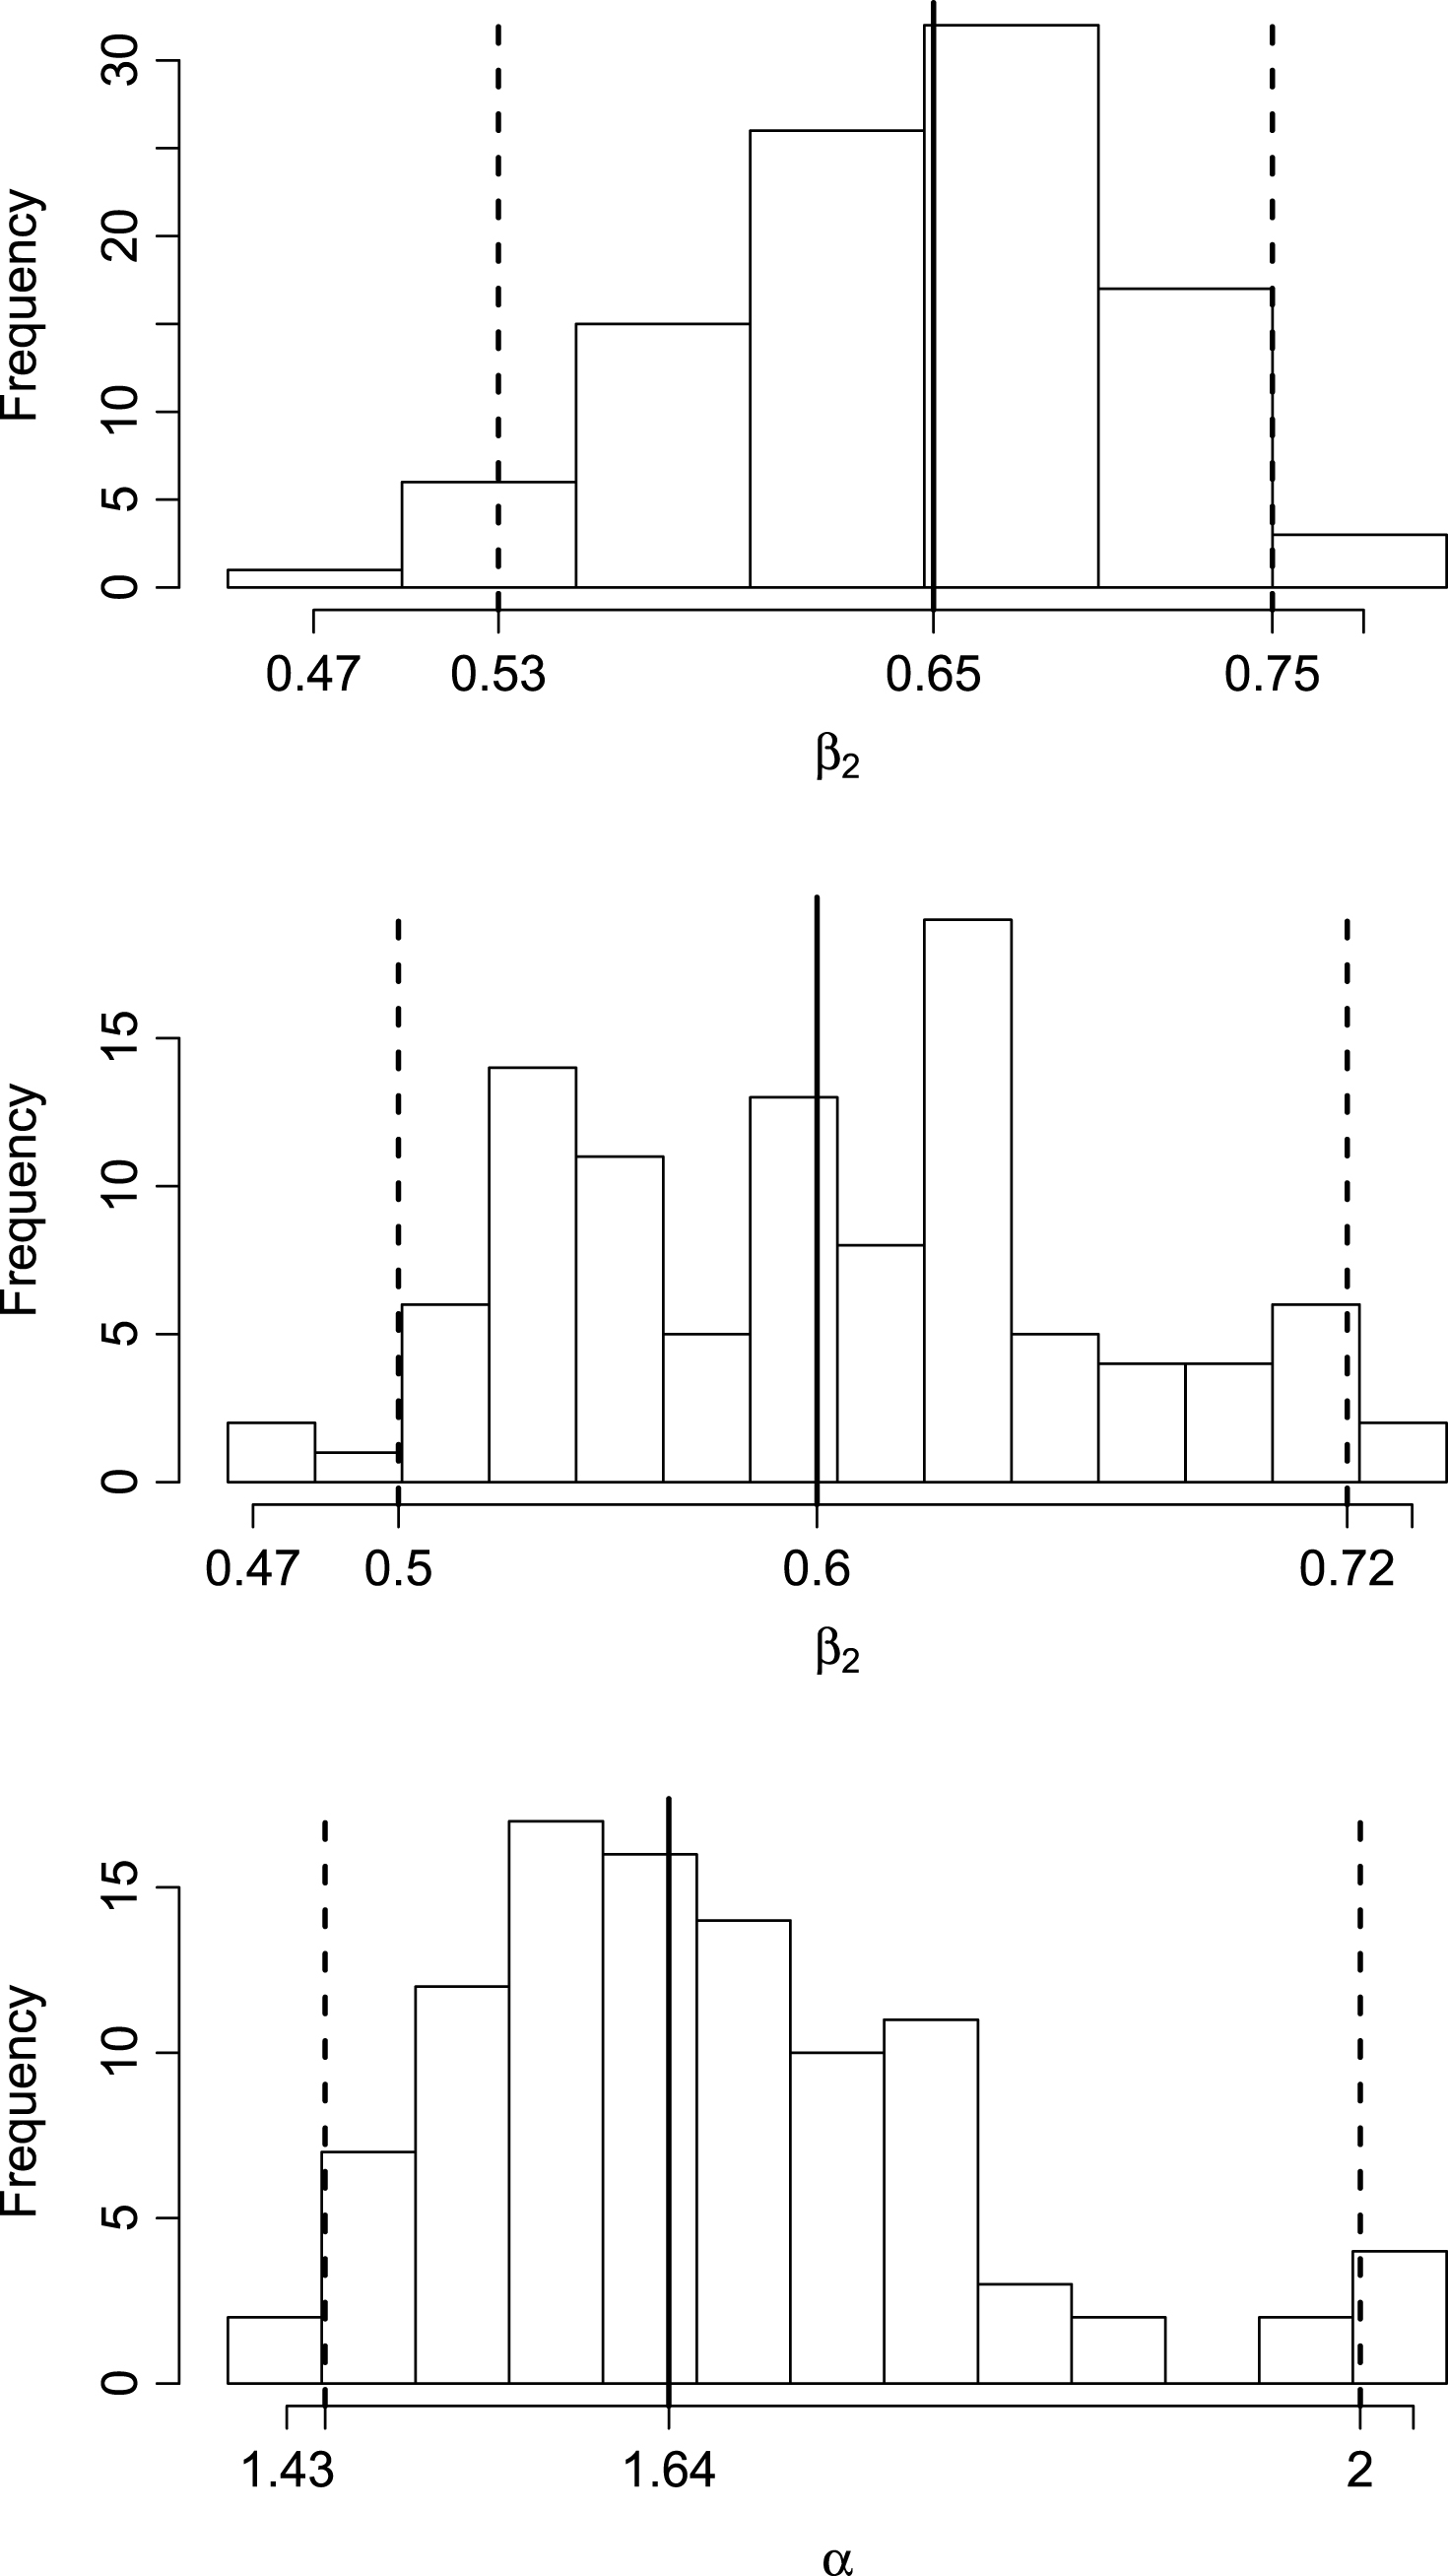 Distributions of the stylized facts estimated for various parameter configurations. The power function exponent (β
2) for binned market impact data (top) and for all data (middle). The power-law function exponent (α) for relative limit prices (bottom). For each distribution, the meadian (solid vertical line) and the 95% confidence bands illustrated through the 2.5 and 97.5 percentiles (vertical dotted lines) are plotted.